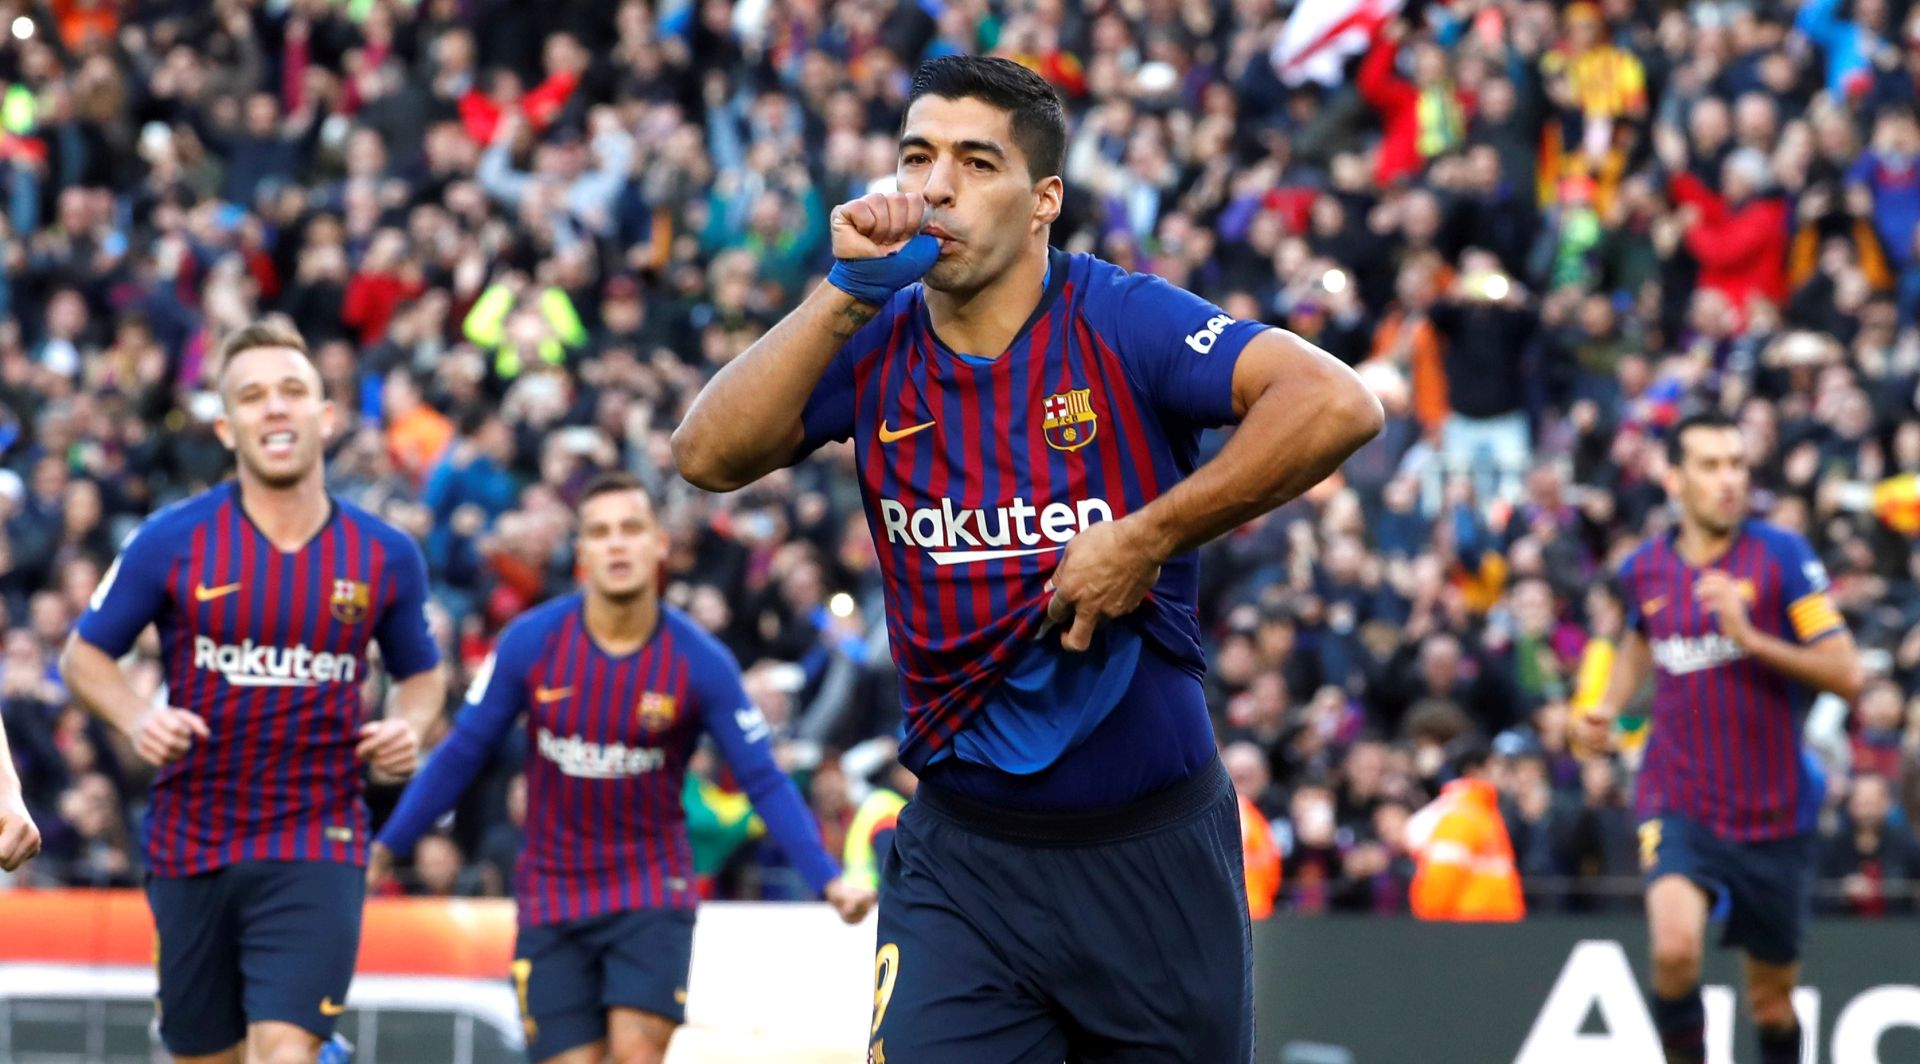 epa07126970 FC Barcelona's Luis Suarez (C) celebrates after scoring the 2-0 lead during a Spanish LaLiga soccer match between FC Barcelona and Real Madrid at the Camp Nou stadium in Barcelona, north eastern Spain, 28 October 2018.  EPA/TONI ALBIR